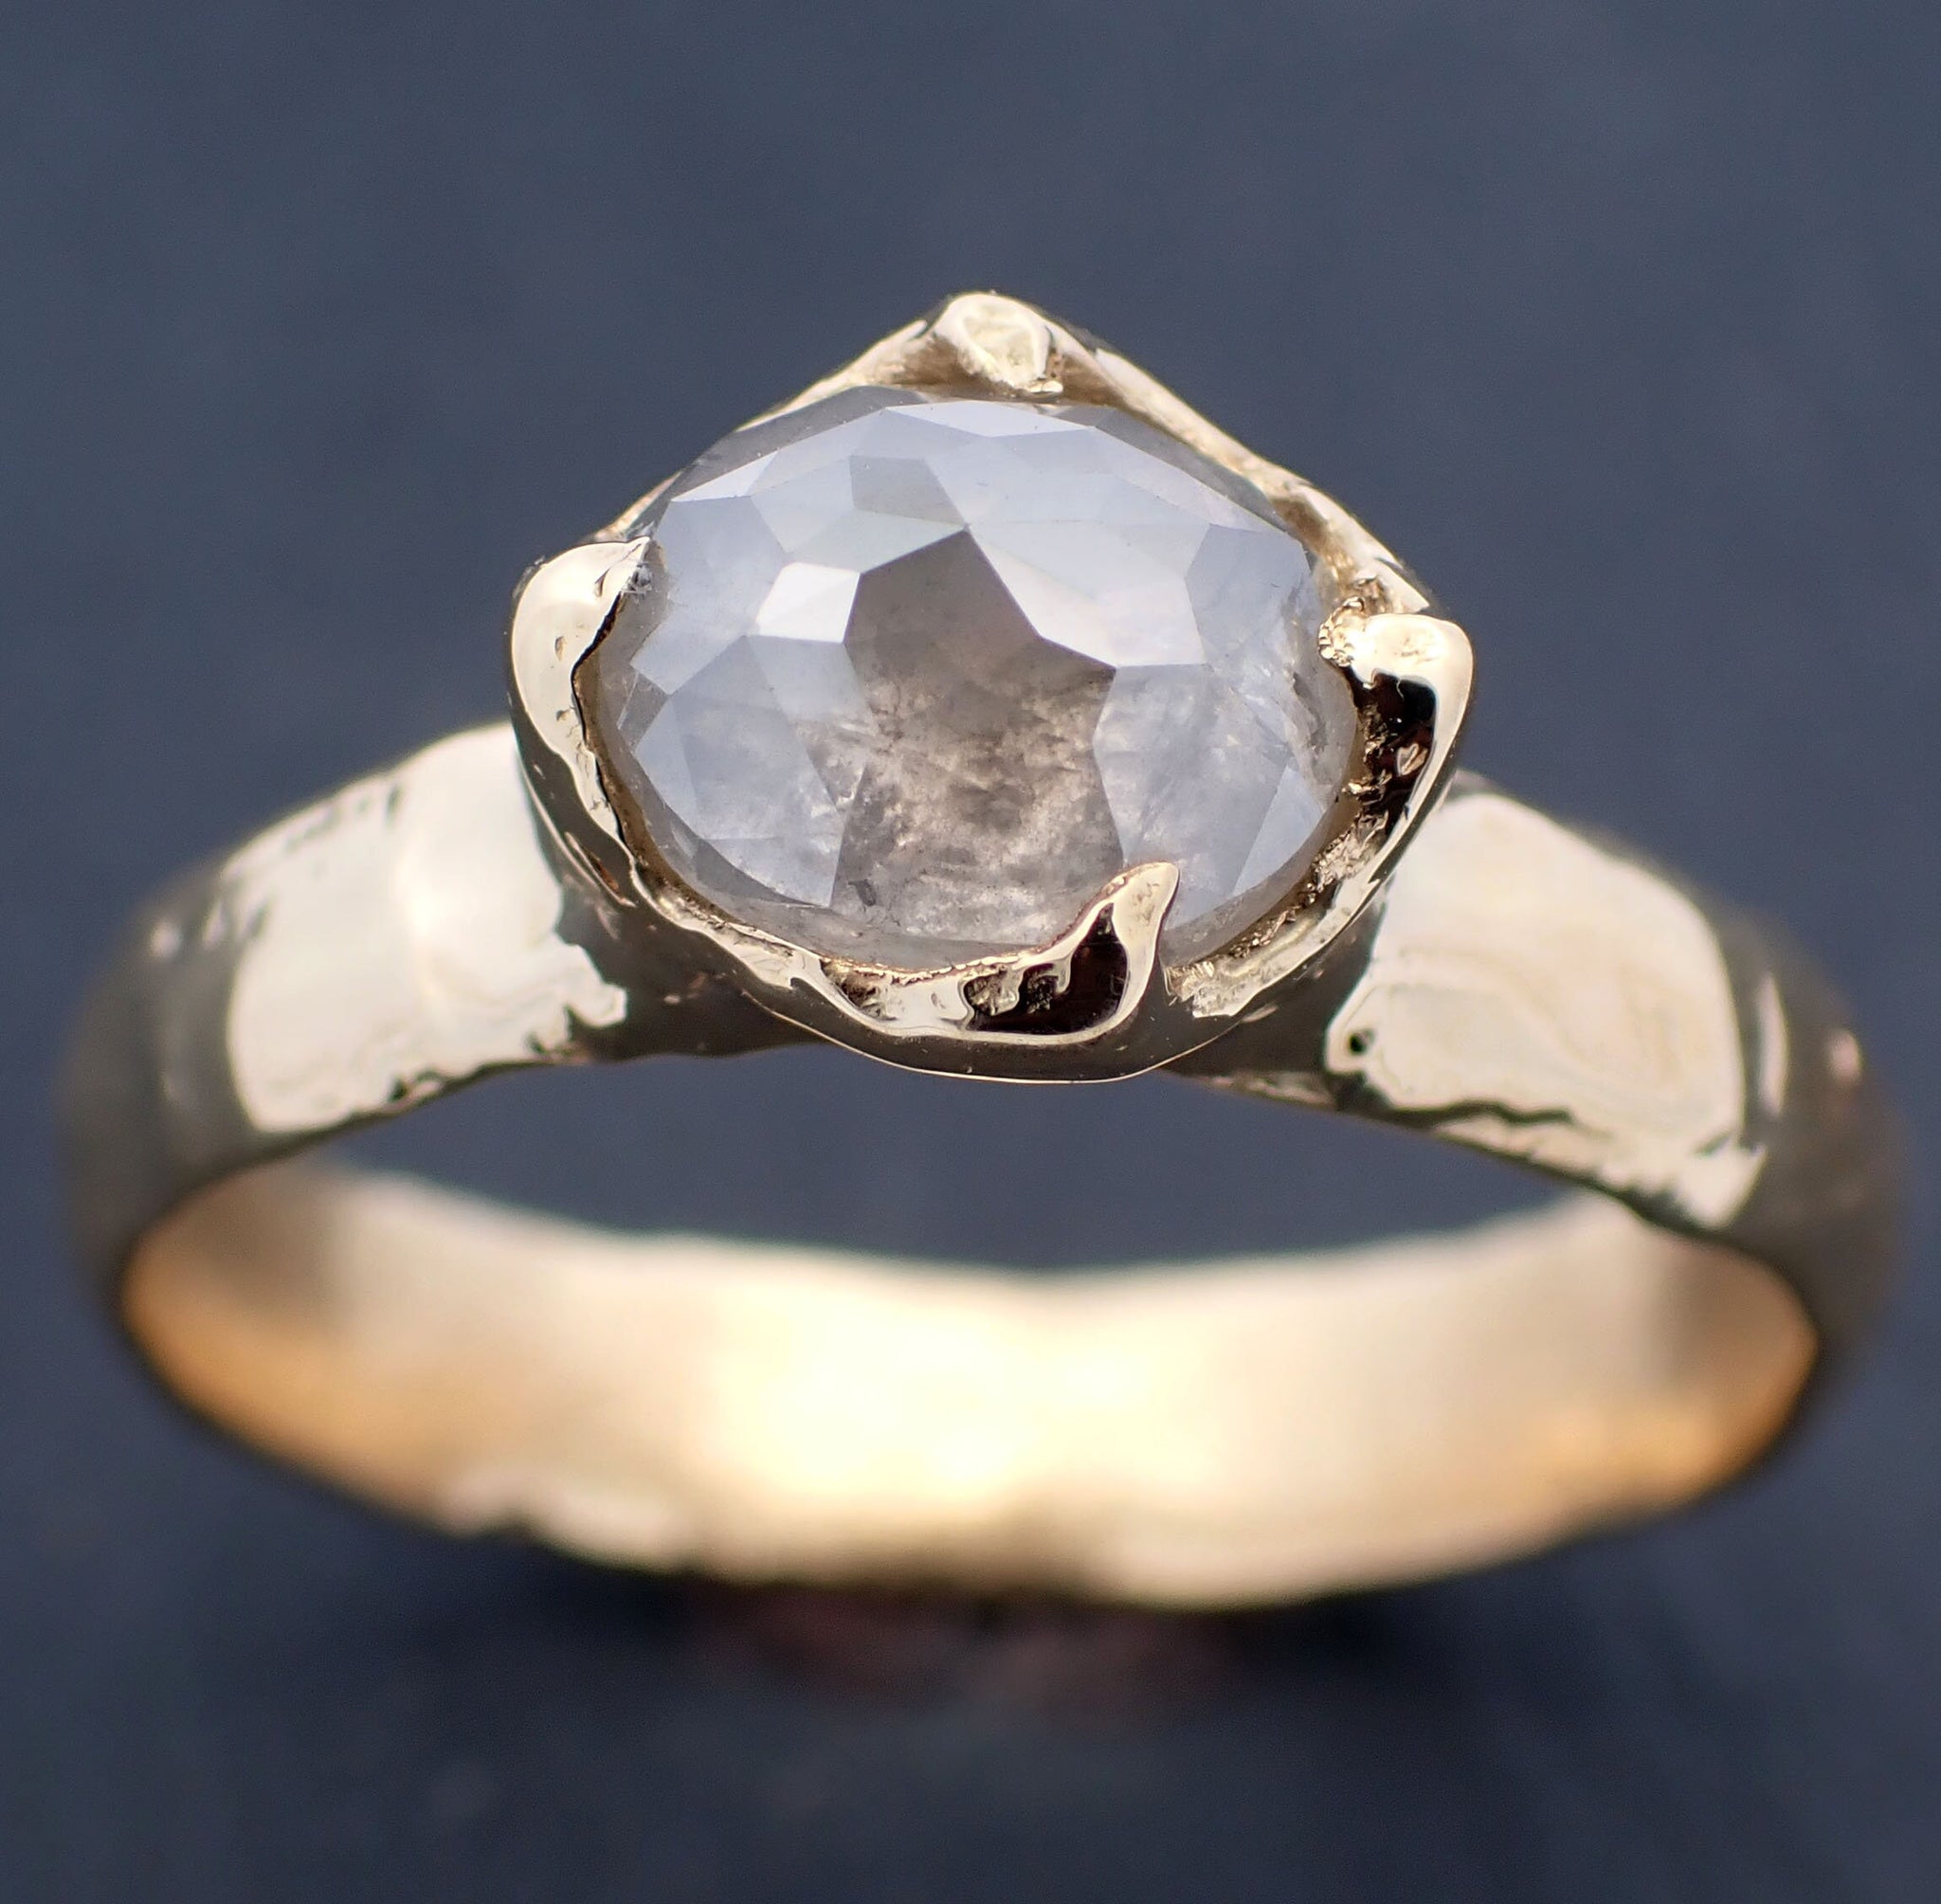 Faceted Fancy cut White Diamond Solitaire Engagement 18k Yellow Gold Wedding Ring byAngeline 3445